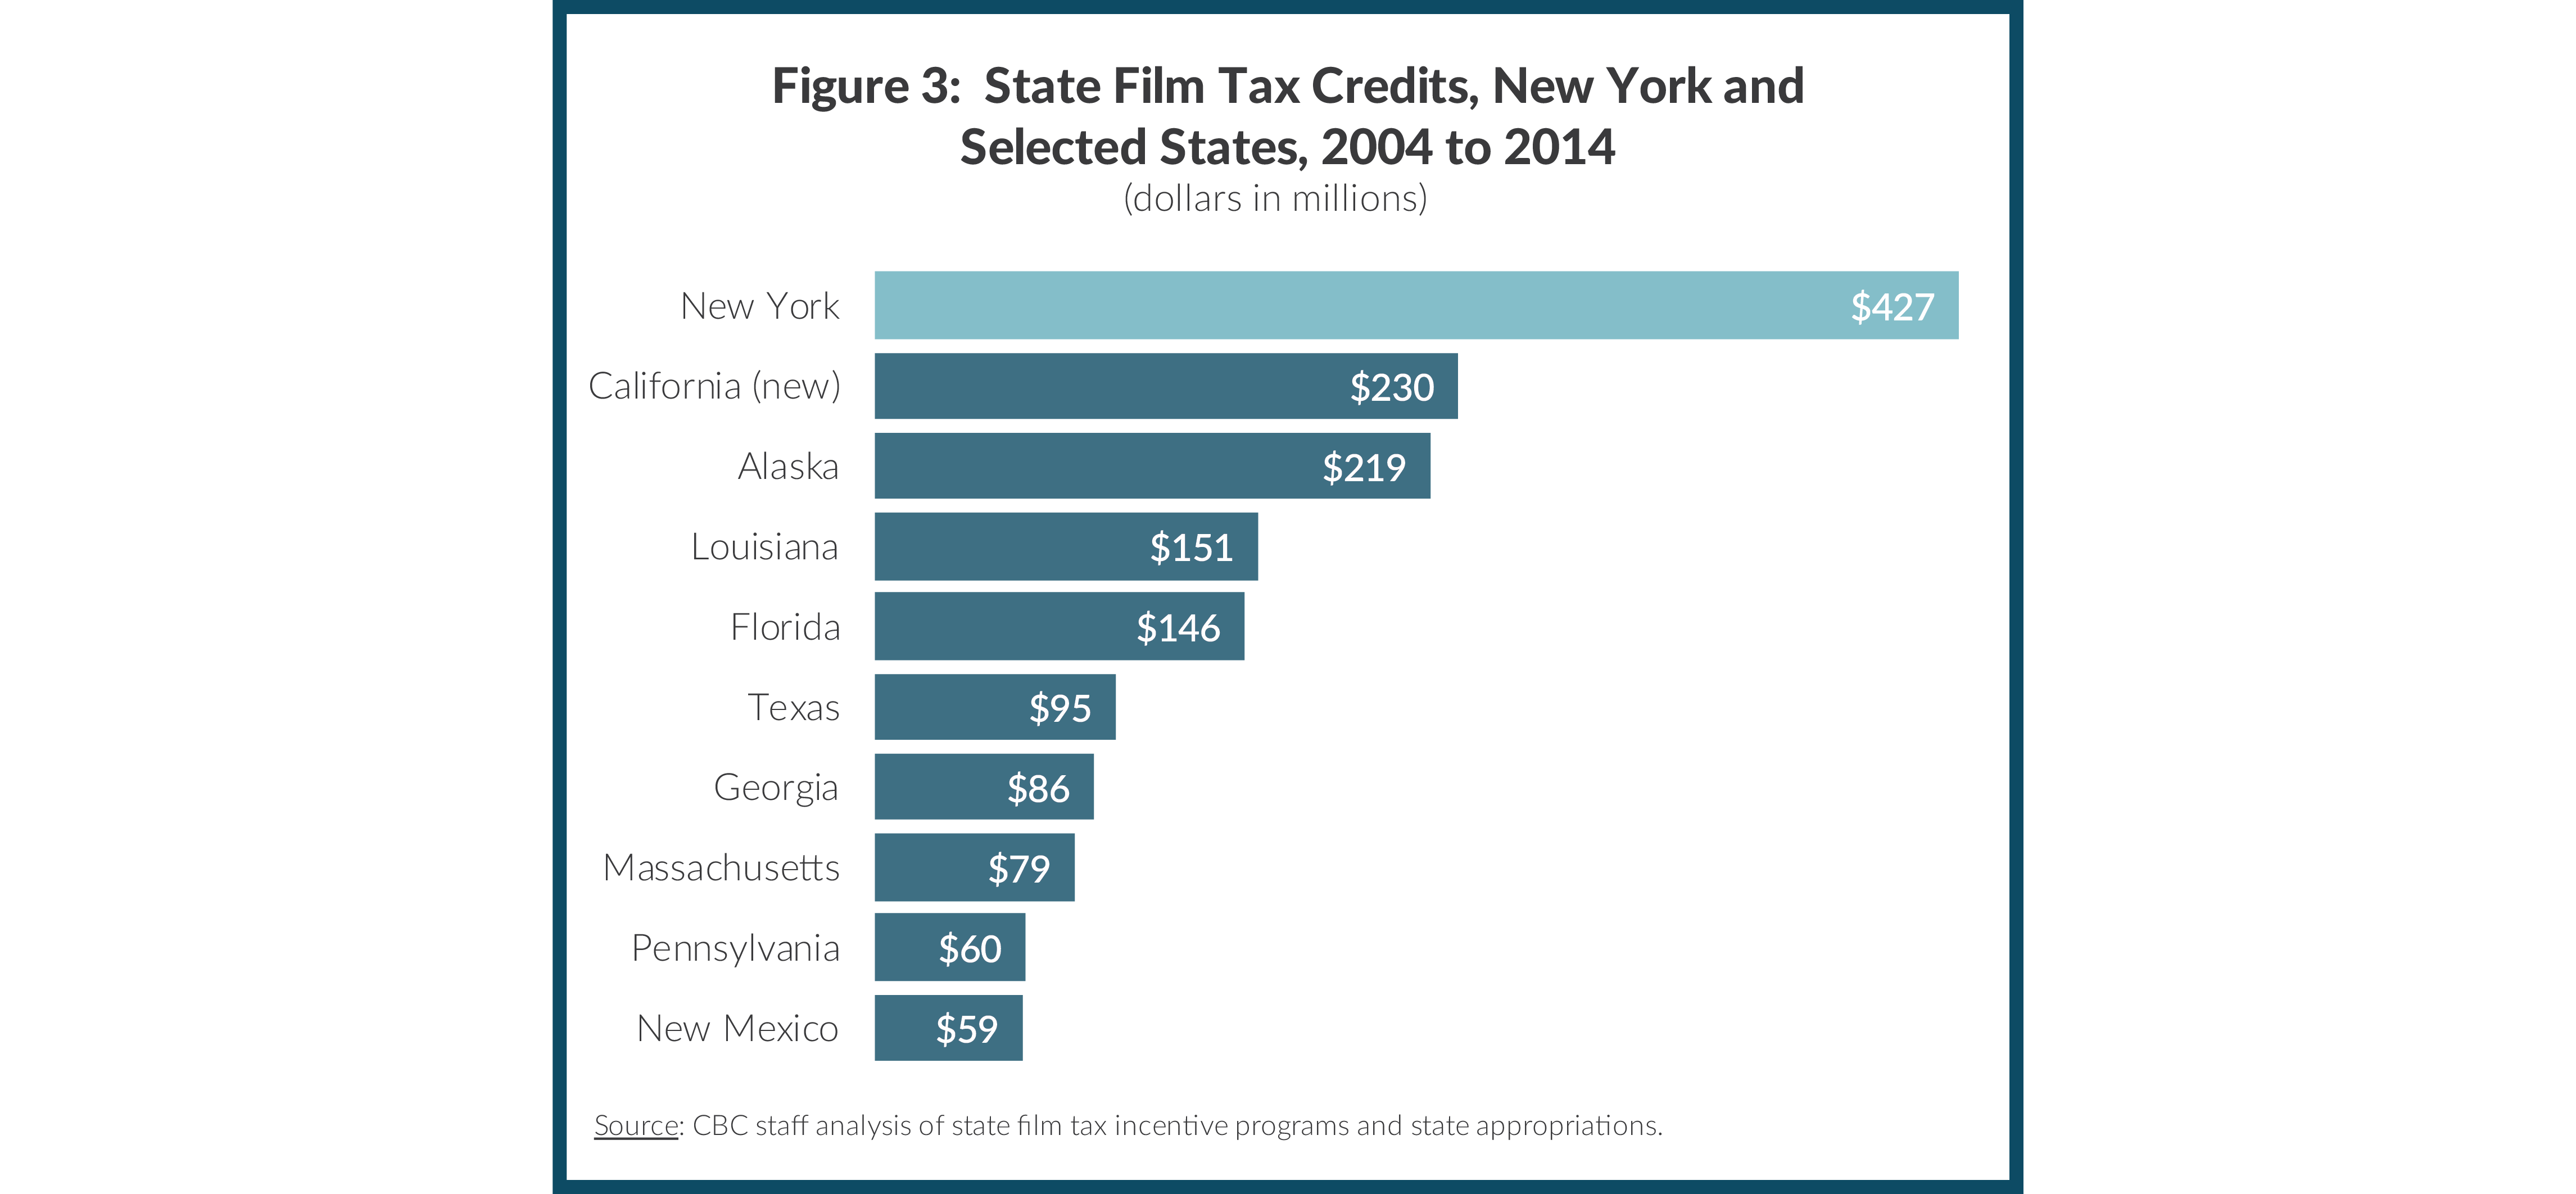 Figure 3:  State Film Tax Credits, New York and Selected States, 2004 to 2014